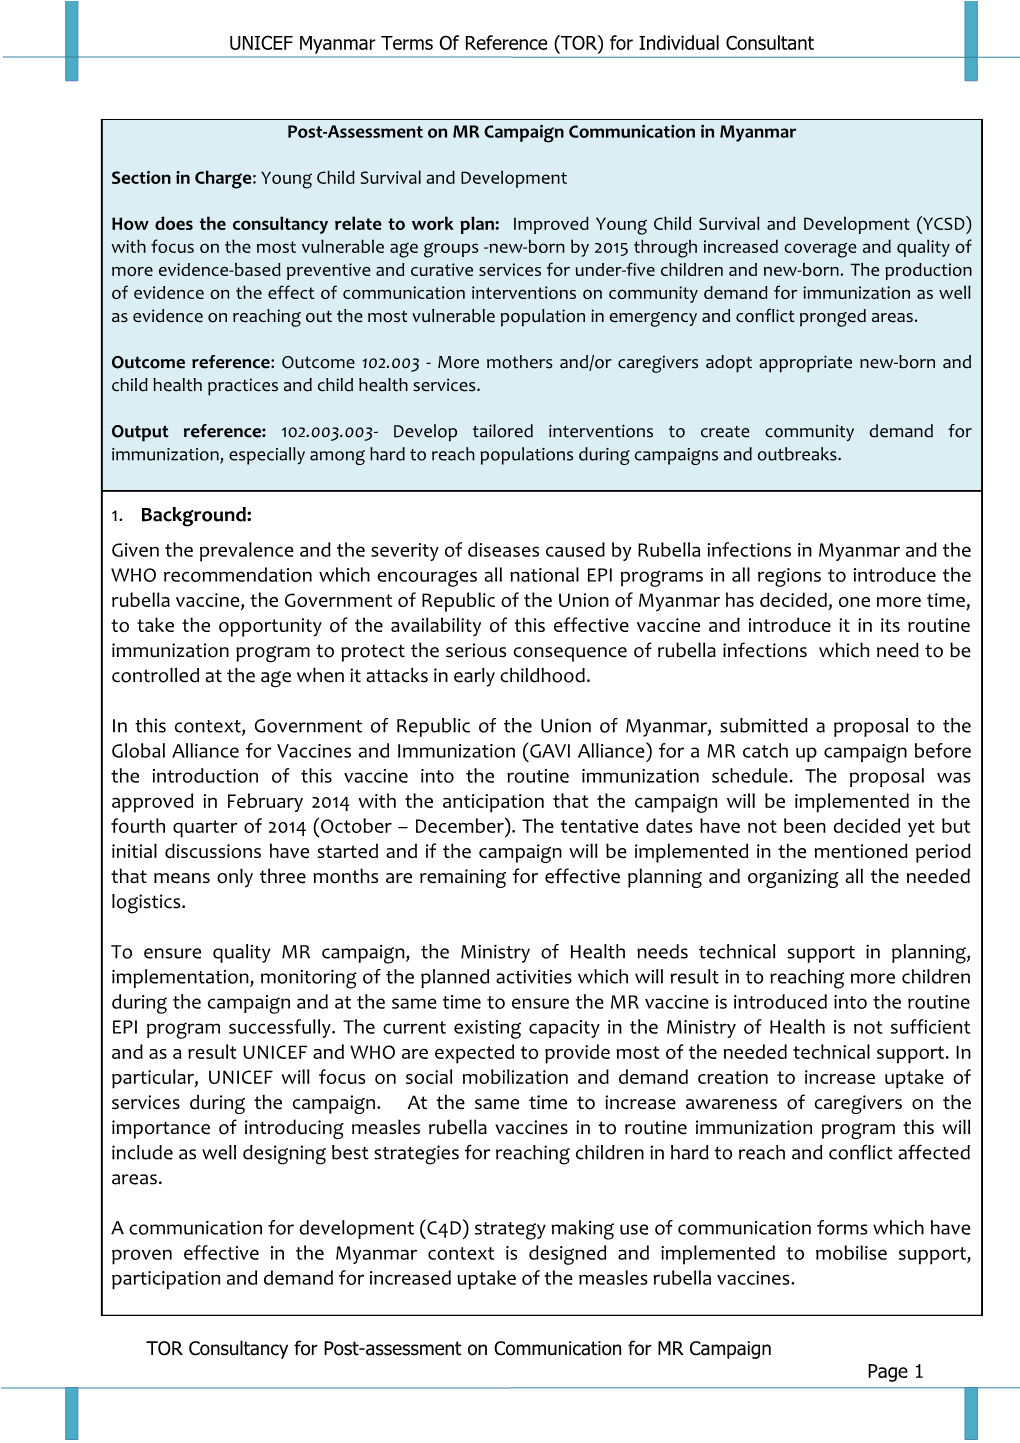 UNICEF Myanmar Terms of Reference (TOR) for Individual Consultant